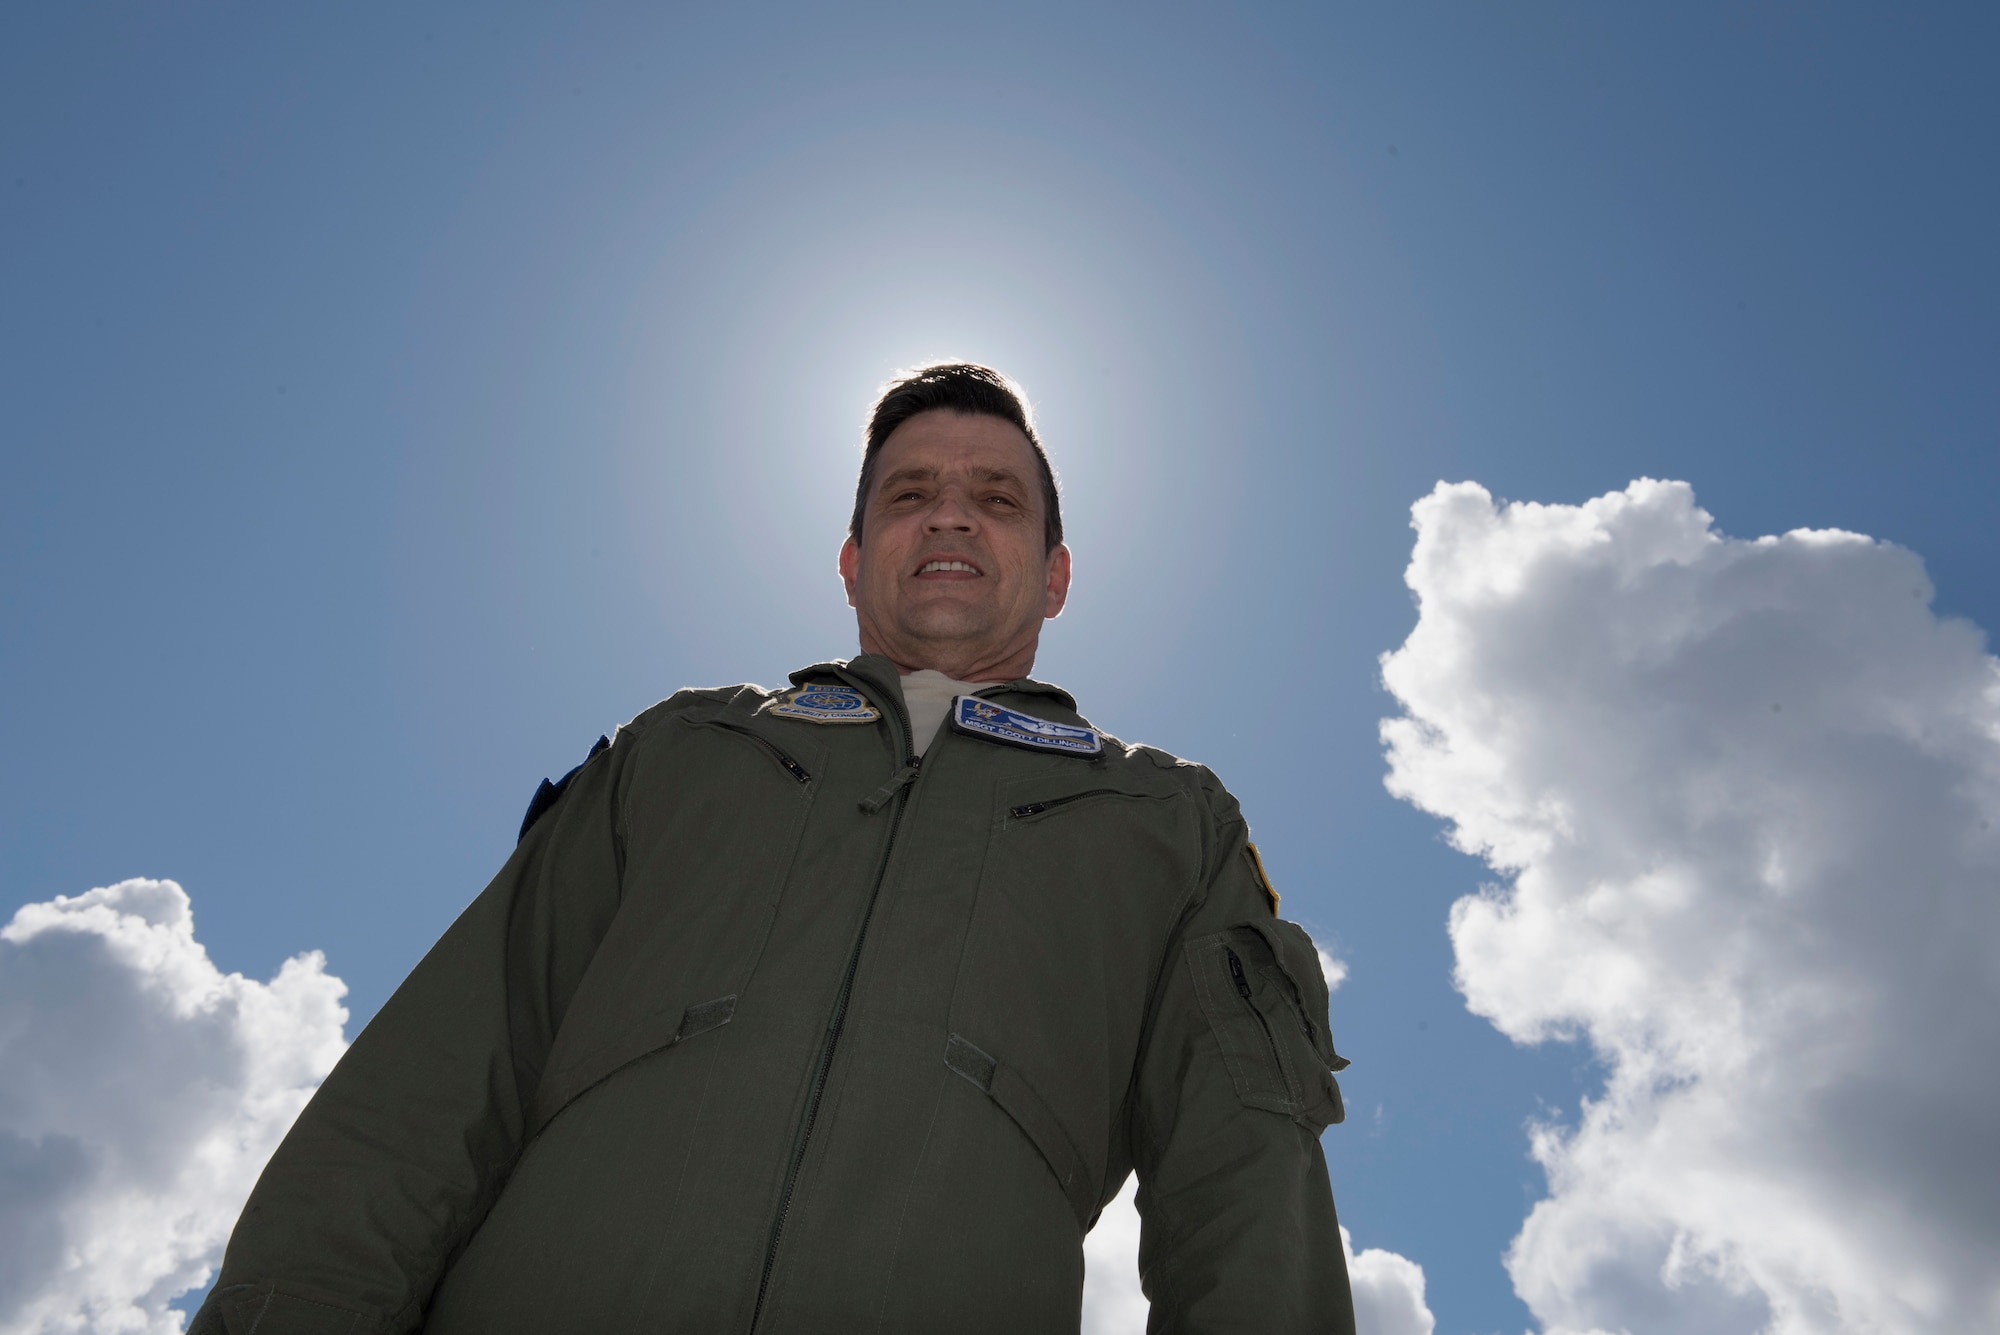 Master Sgt. Scott Dillinger, 6th Air Refueling Squadron noncommissioned officer in charge of standardization and evaluation and a KC-10 Extender flight engineer, poses for a photo outside a KC-10 June 1, 2018 after landing at Eielson Air Force Base, Alaska. Dillinger and his crew flew the aircraft to Misawa Air Base, Japan and back to Alaska providing refueling support for eight F-15s. On June 4 he hit the 10,000 flight hour milestone. (U.S. Air Force photo by Tech. Sgt. James Hodgman)